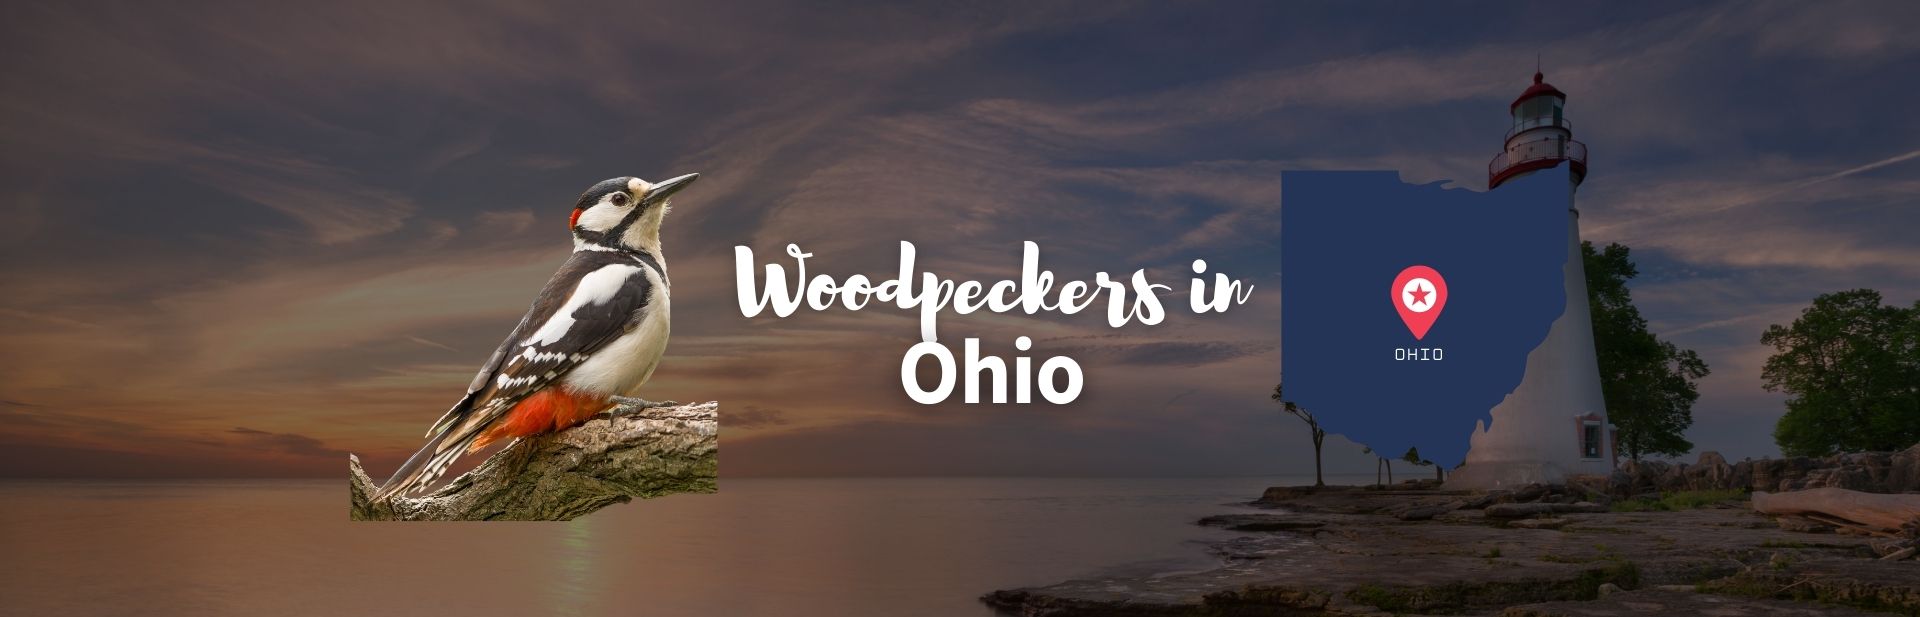 7 Hard-Hitting Species of Woodpeckers in Ohio (With Pictures and Facts)